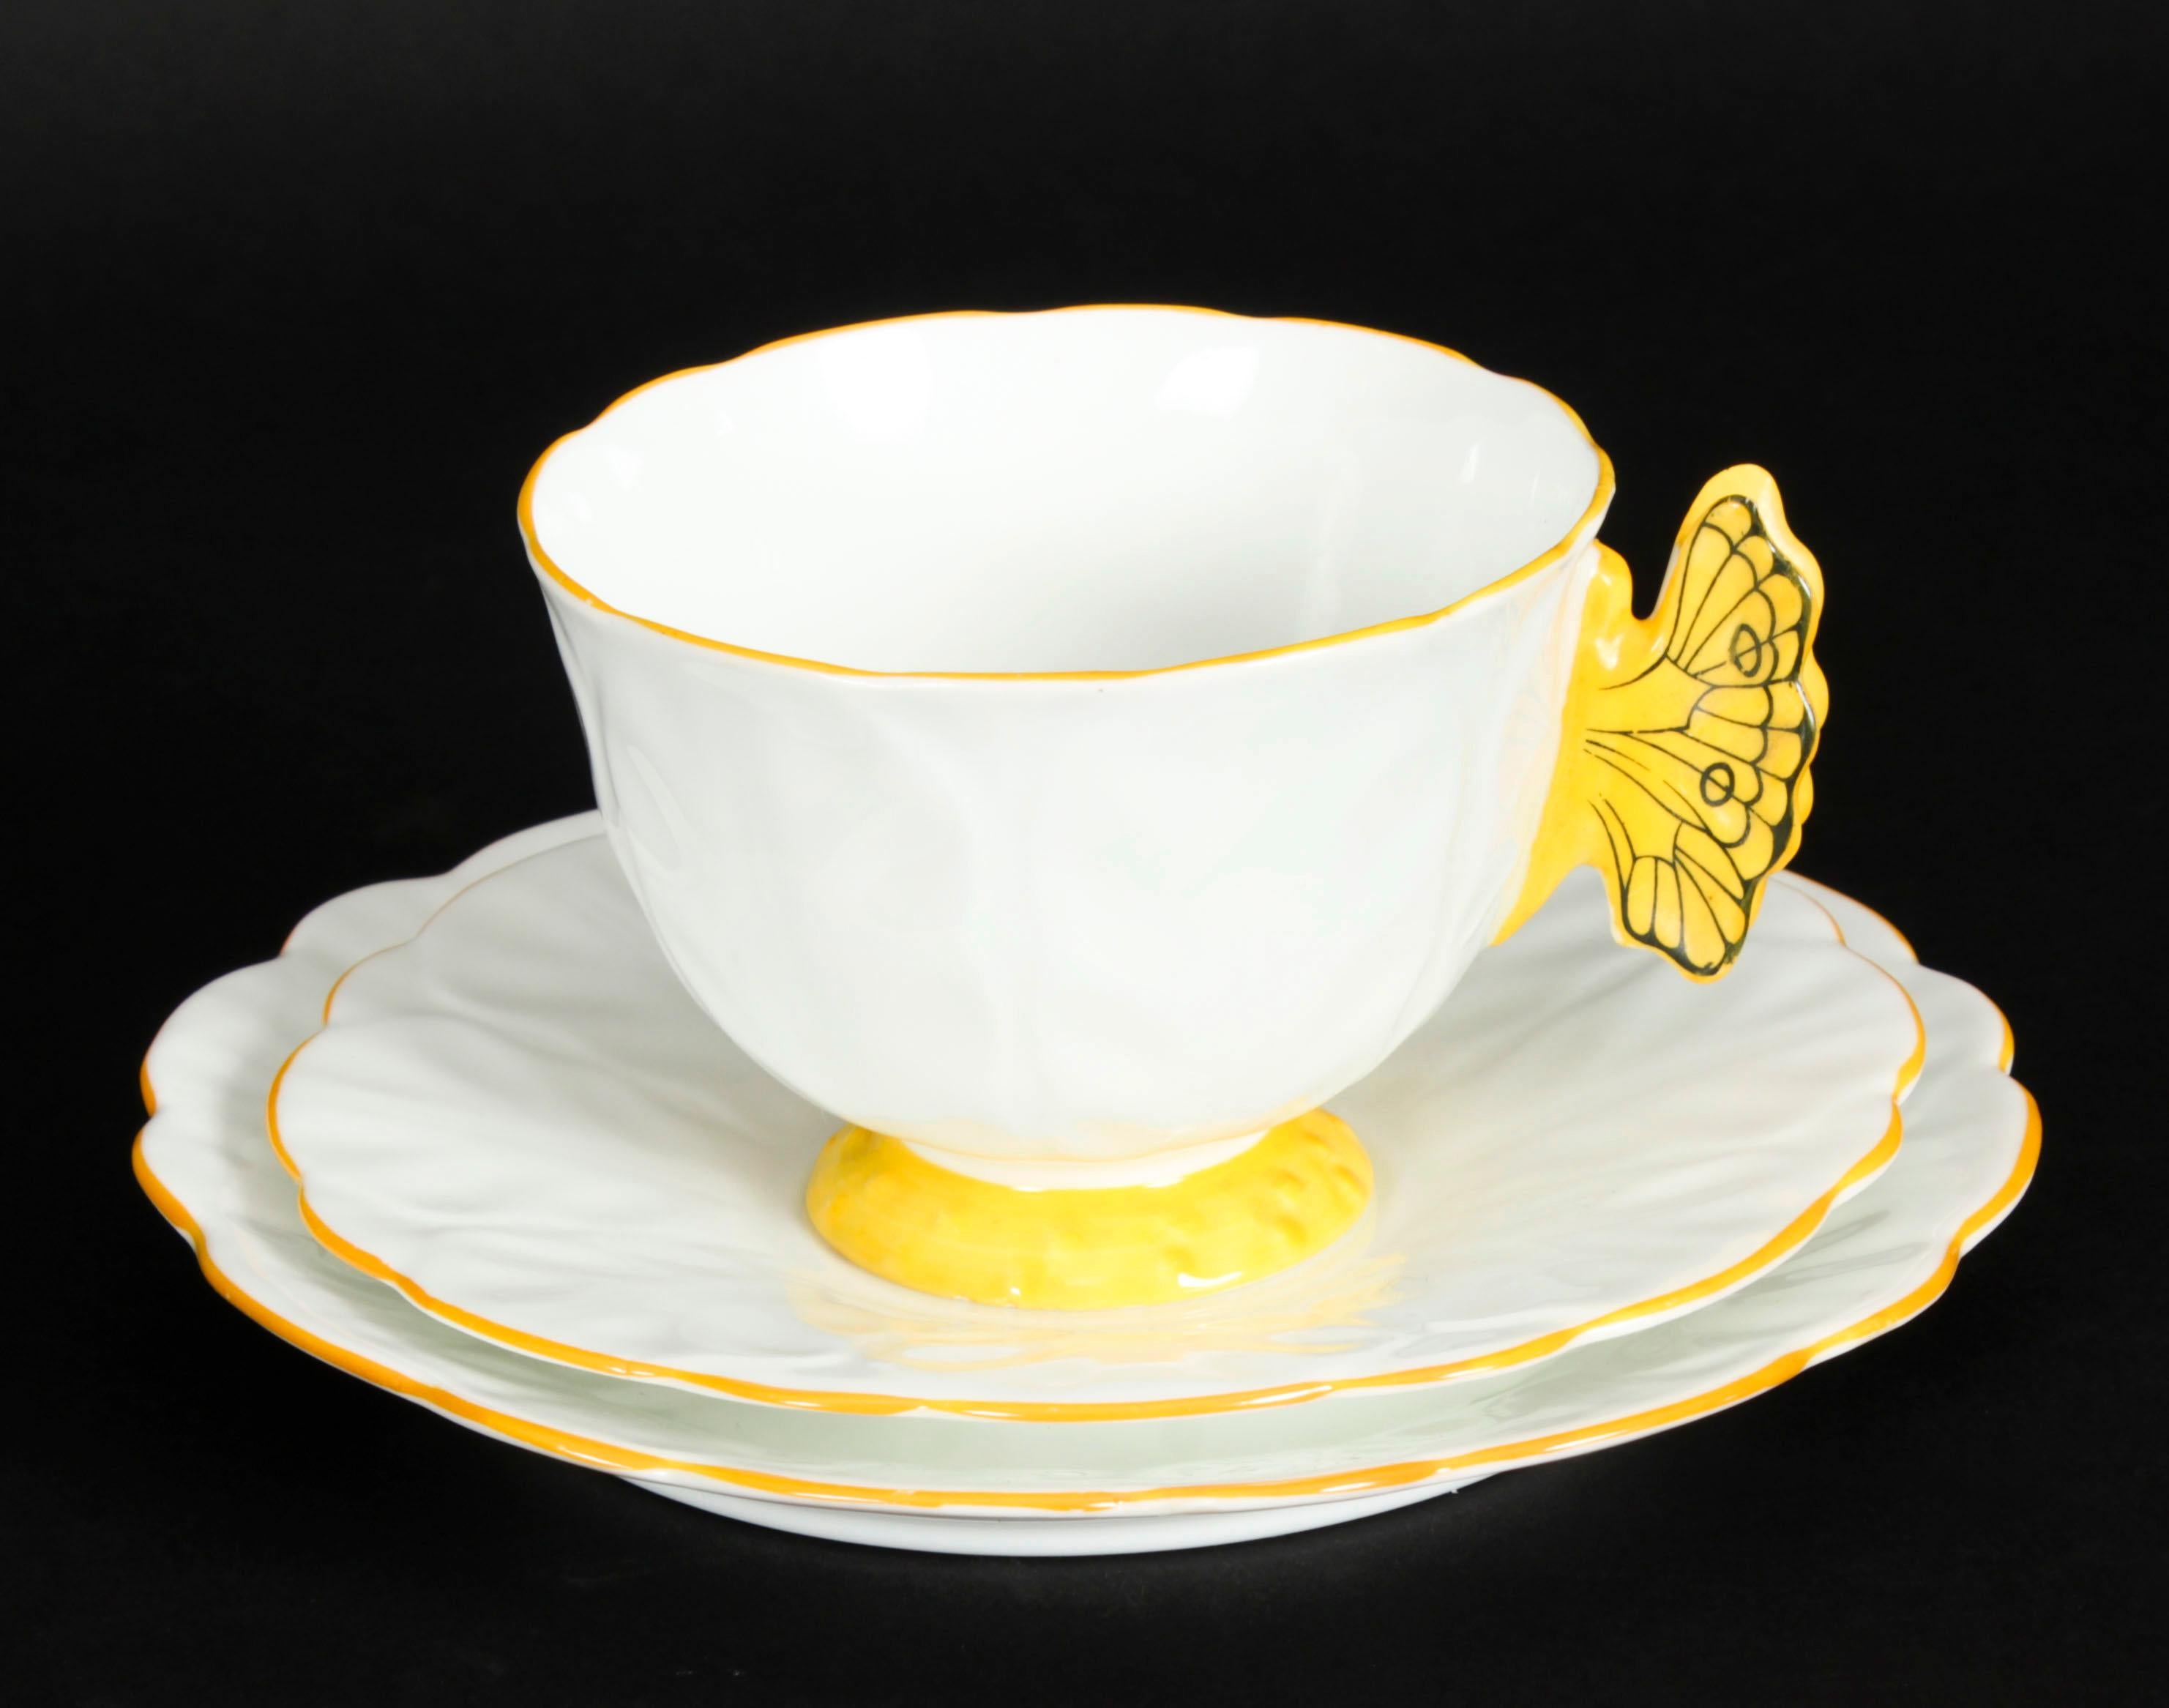 An exquisite, rare, and highly collectible 1920s Tea set with a bright sunshine yellow trim with a butterfly handle.

Aynsley China was a British producer of fine bone china, tableware and commemorative memorabilia, founded in 1775 by John Aynsley